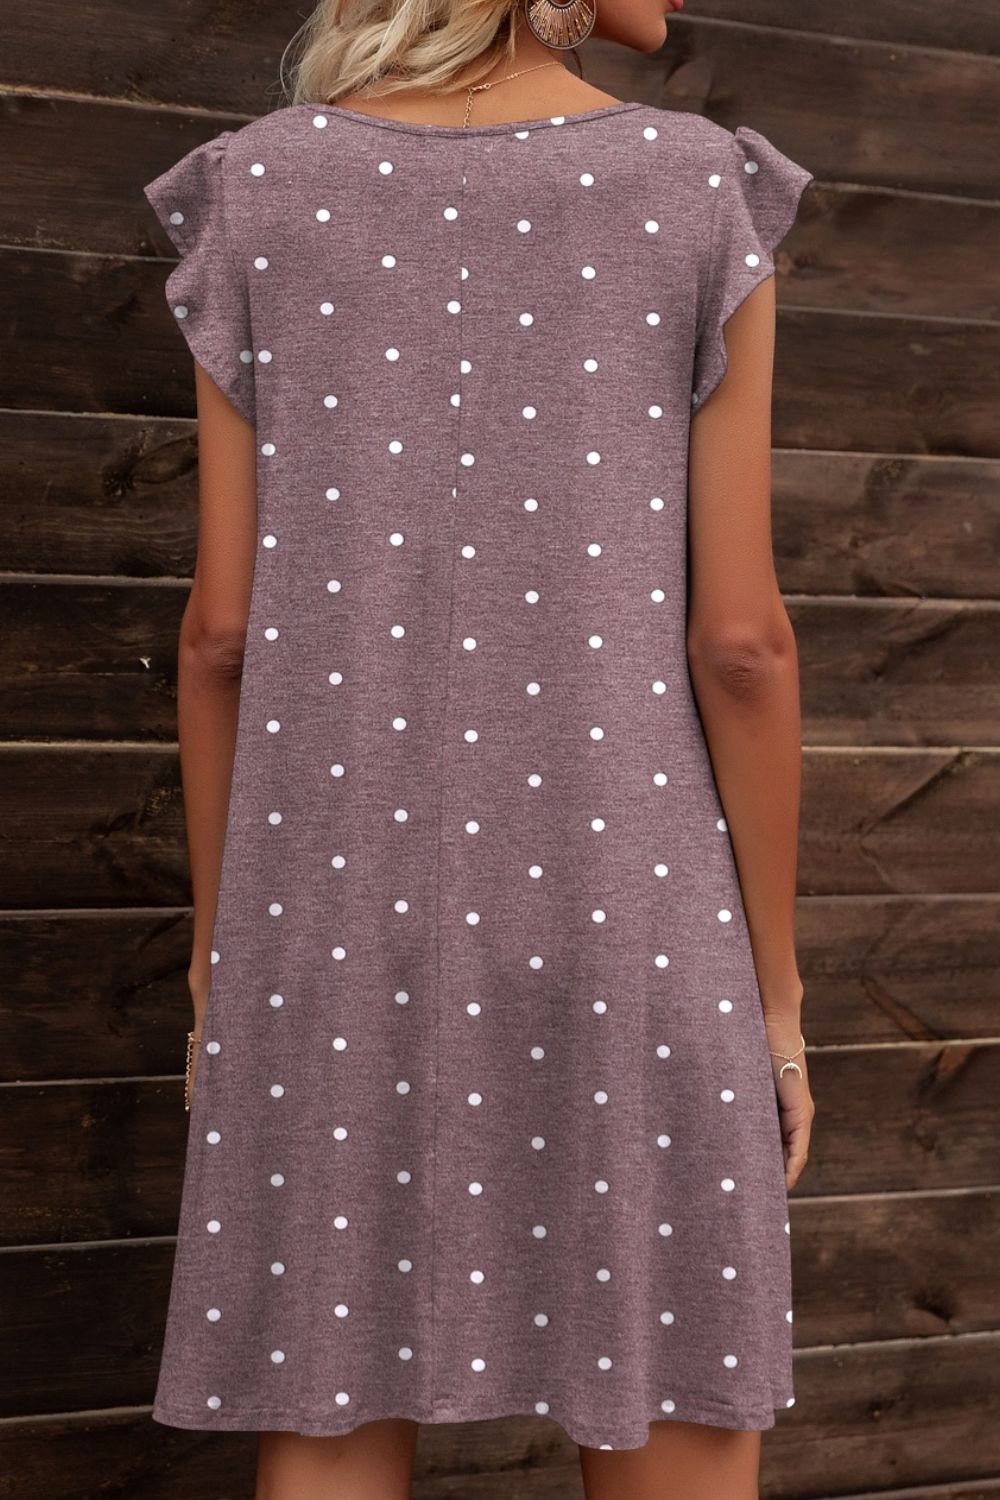 Butterfly Sleeve Round Neck Dress - Online Only